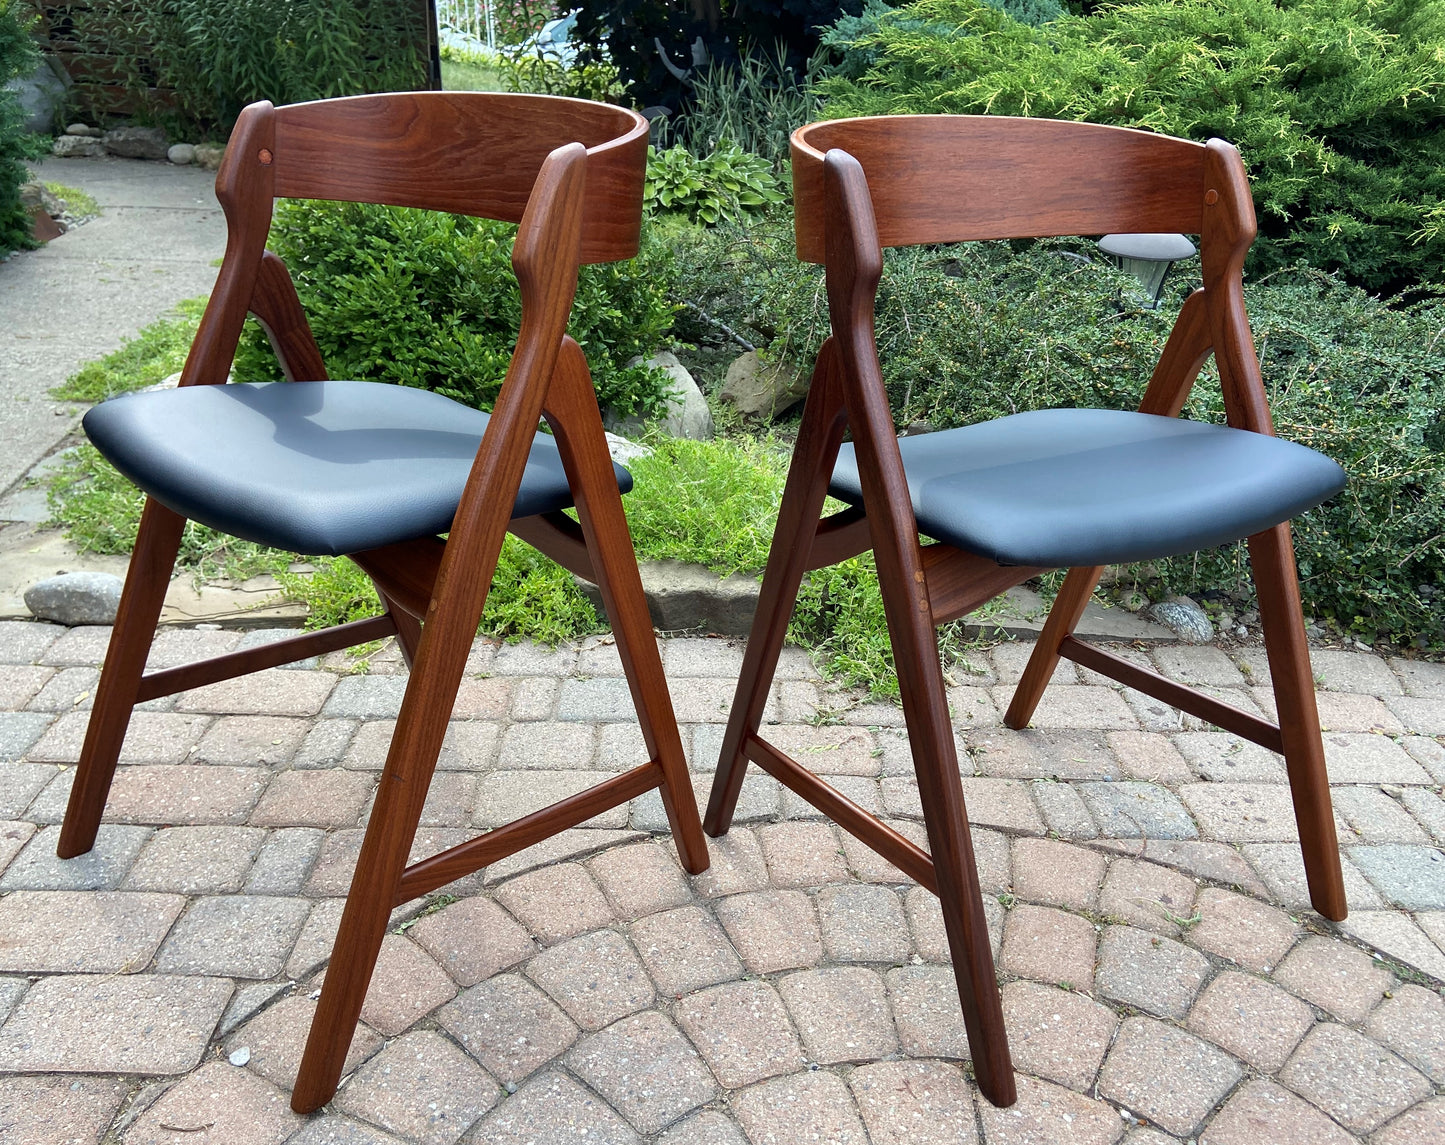 2 REFINISHED REUPHOLSTERED Danish Mid Century Modern Teak Arm Chairs by TH Harlev